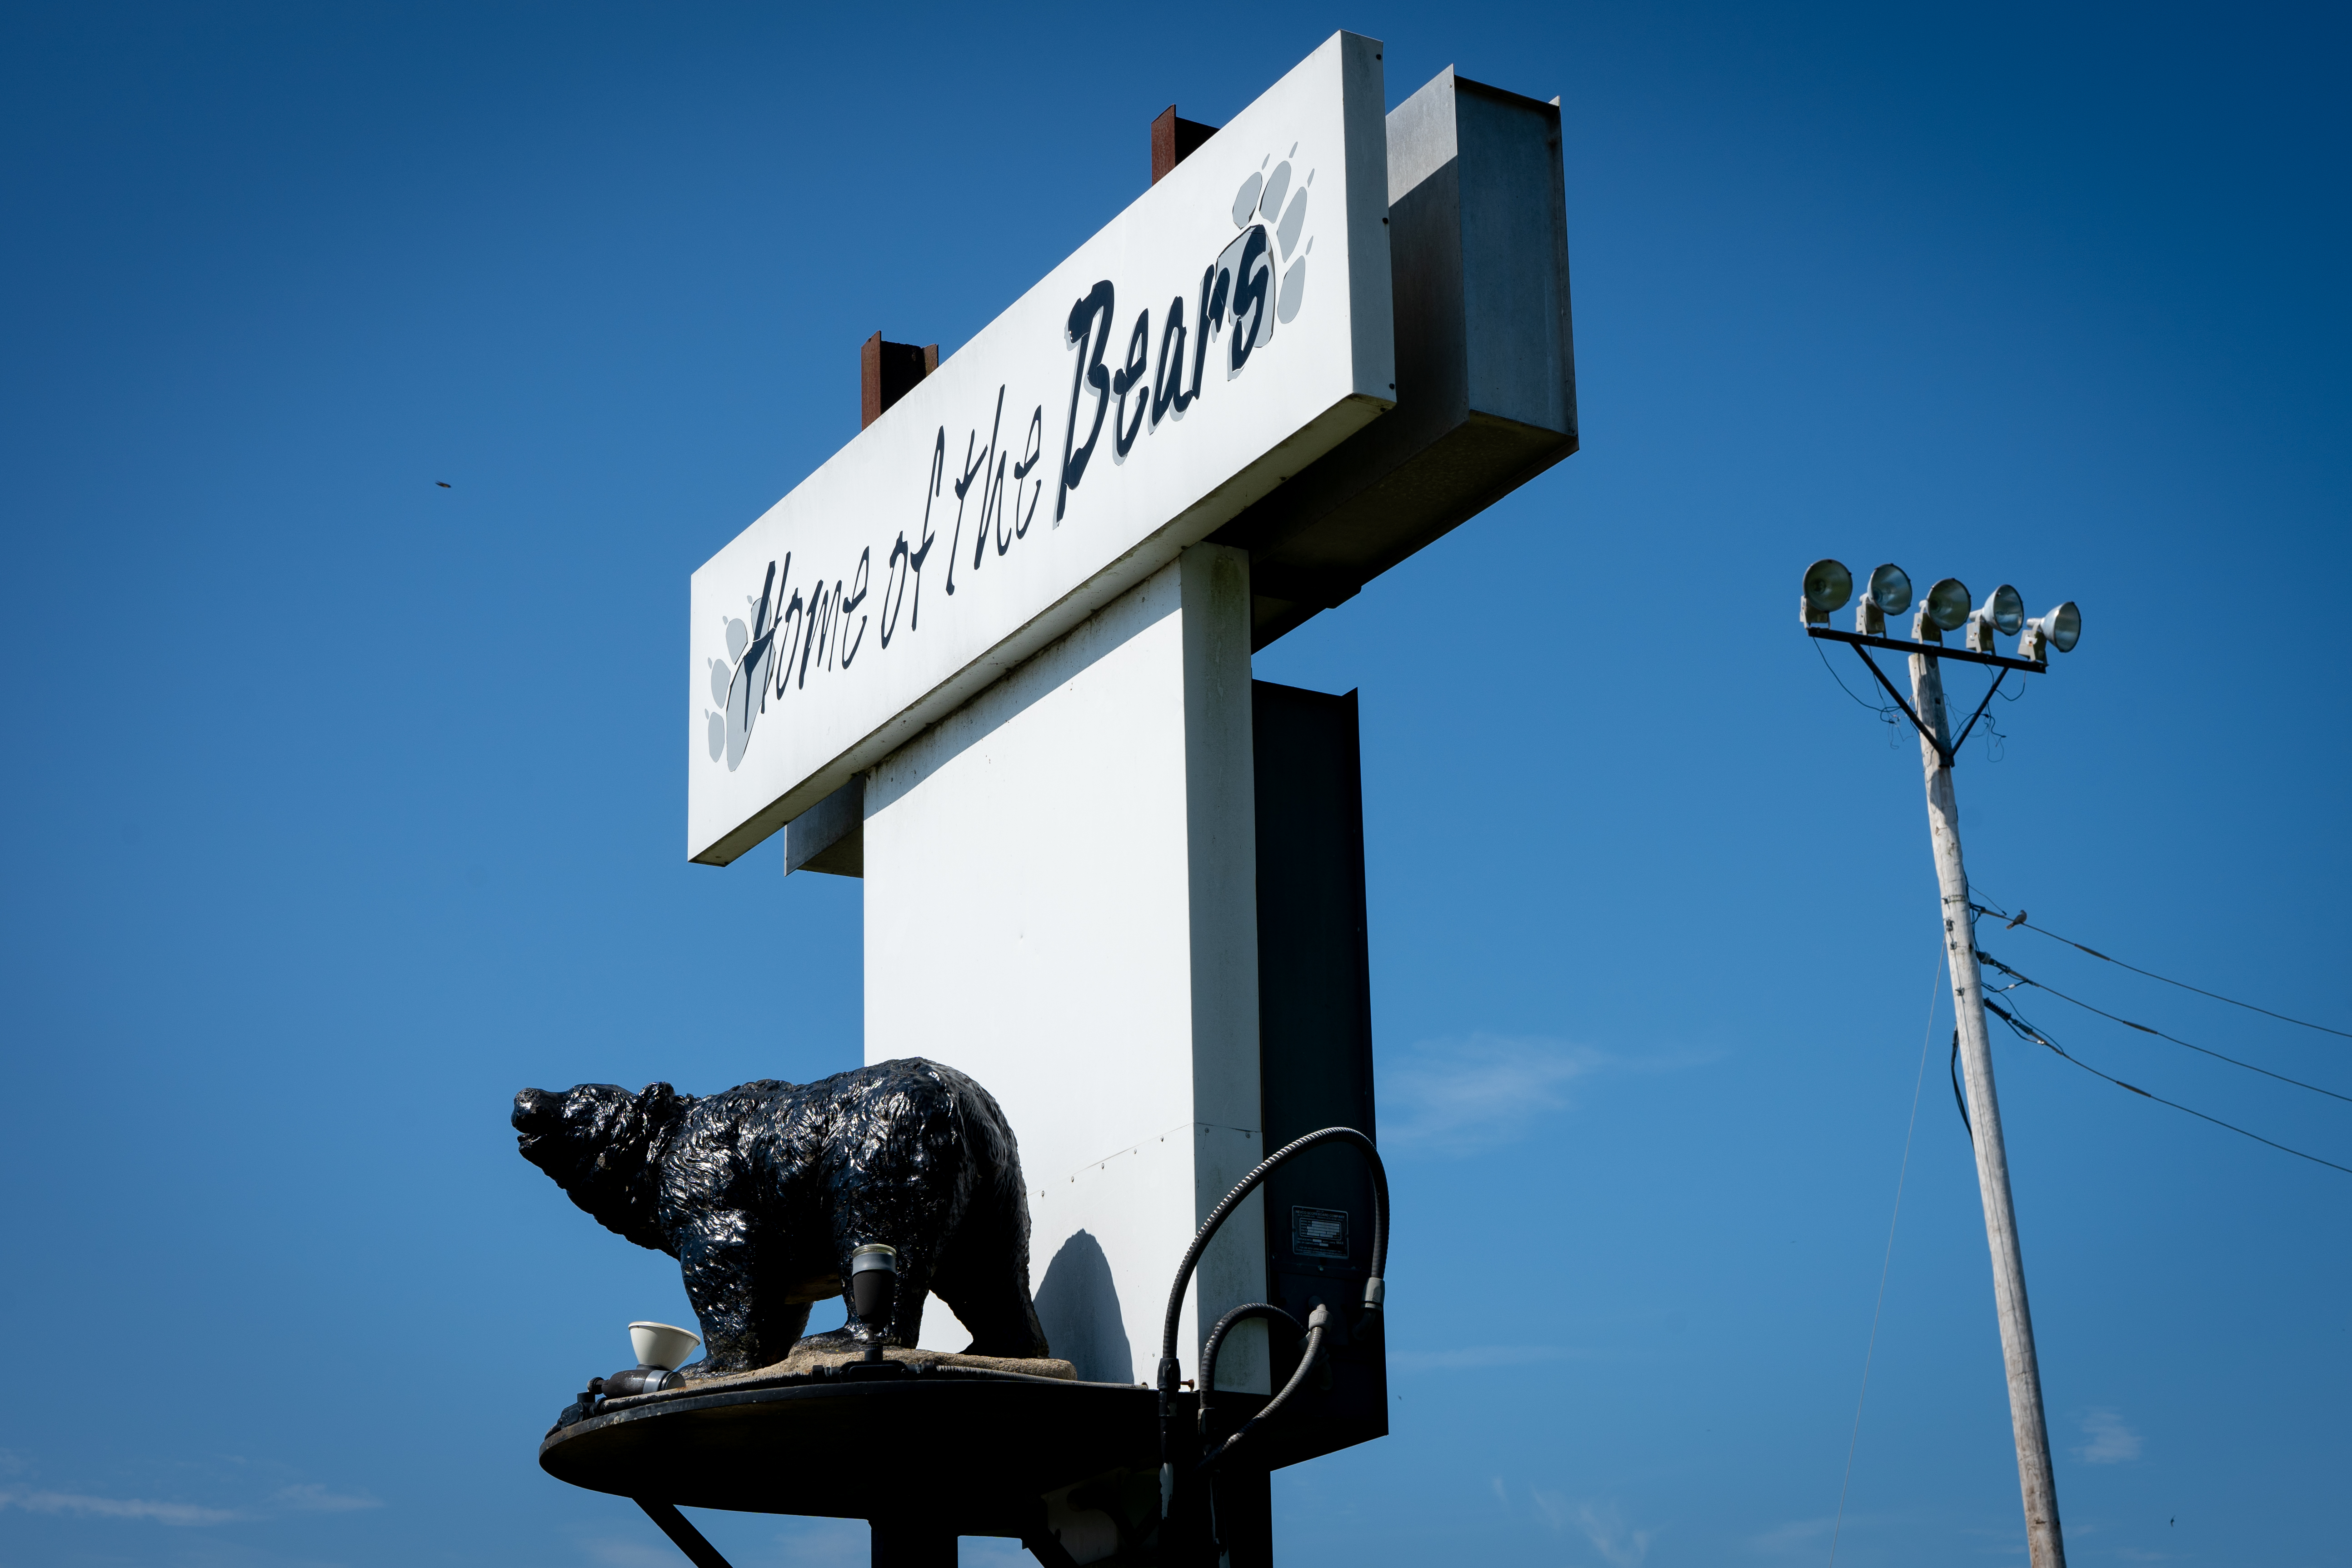 Home of the Bears sign